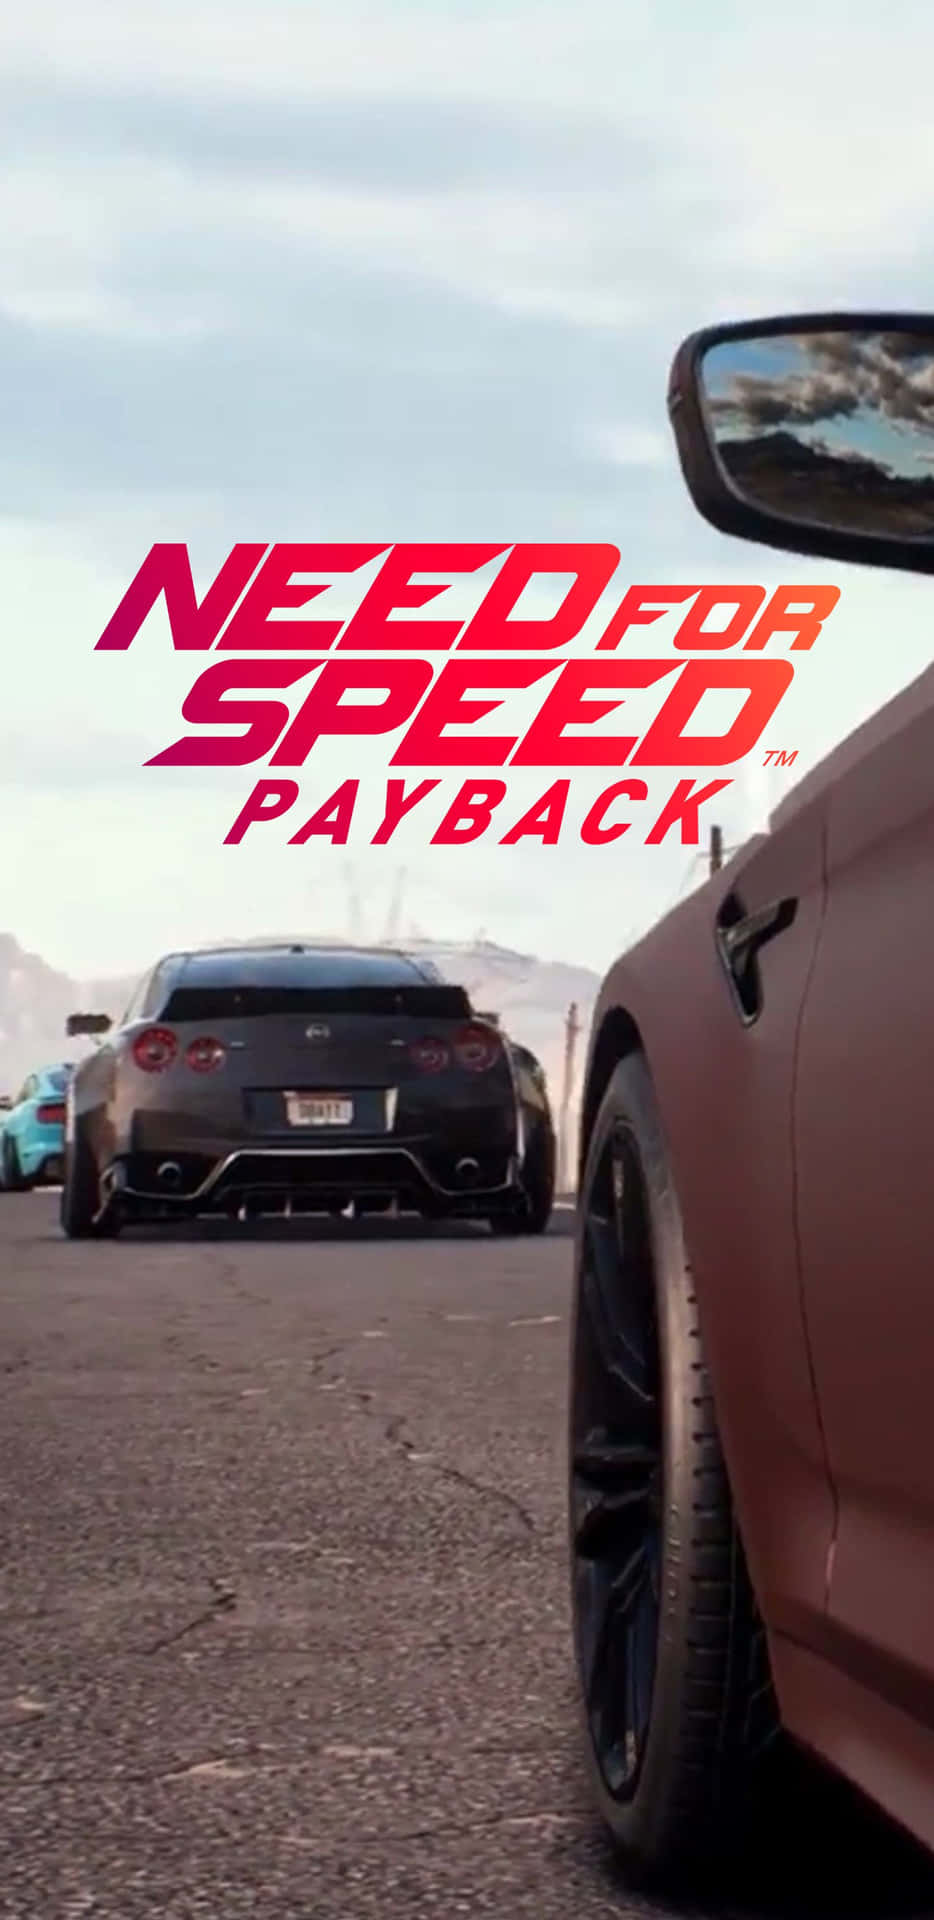 Need For Speed Payback - Pc - Pc - Pc - Pc - Pc -